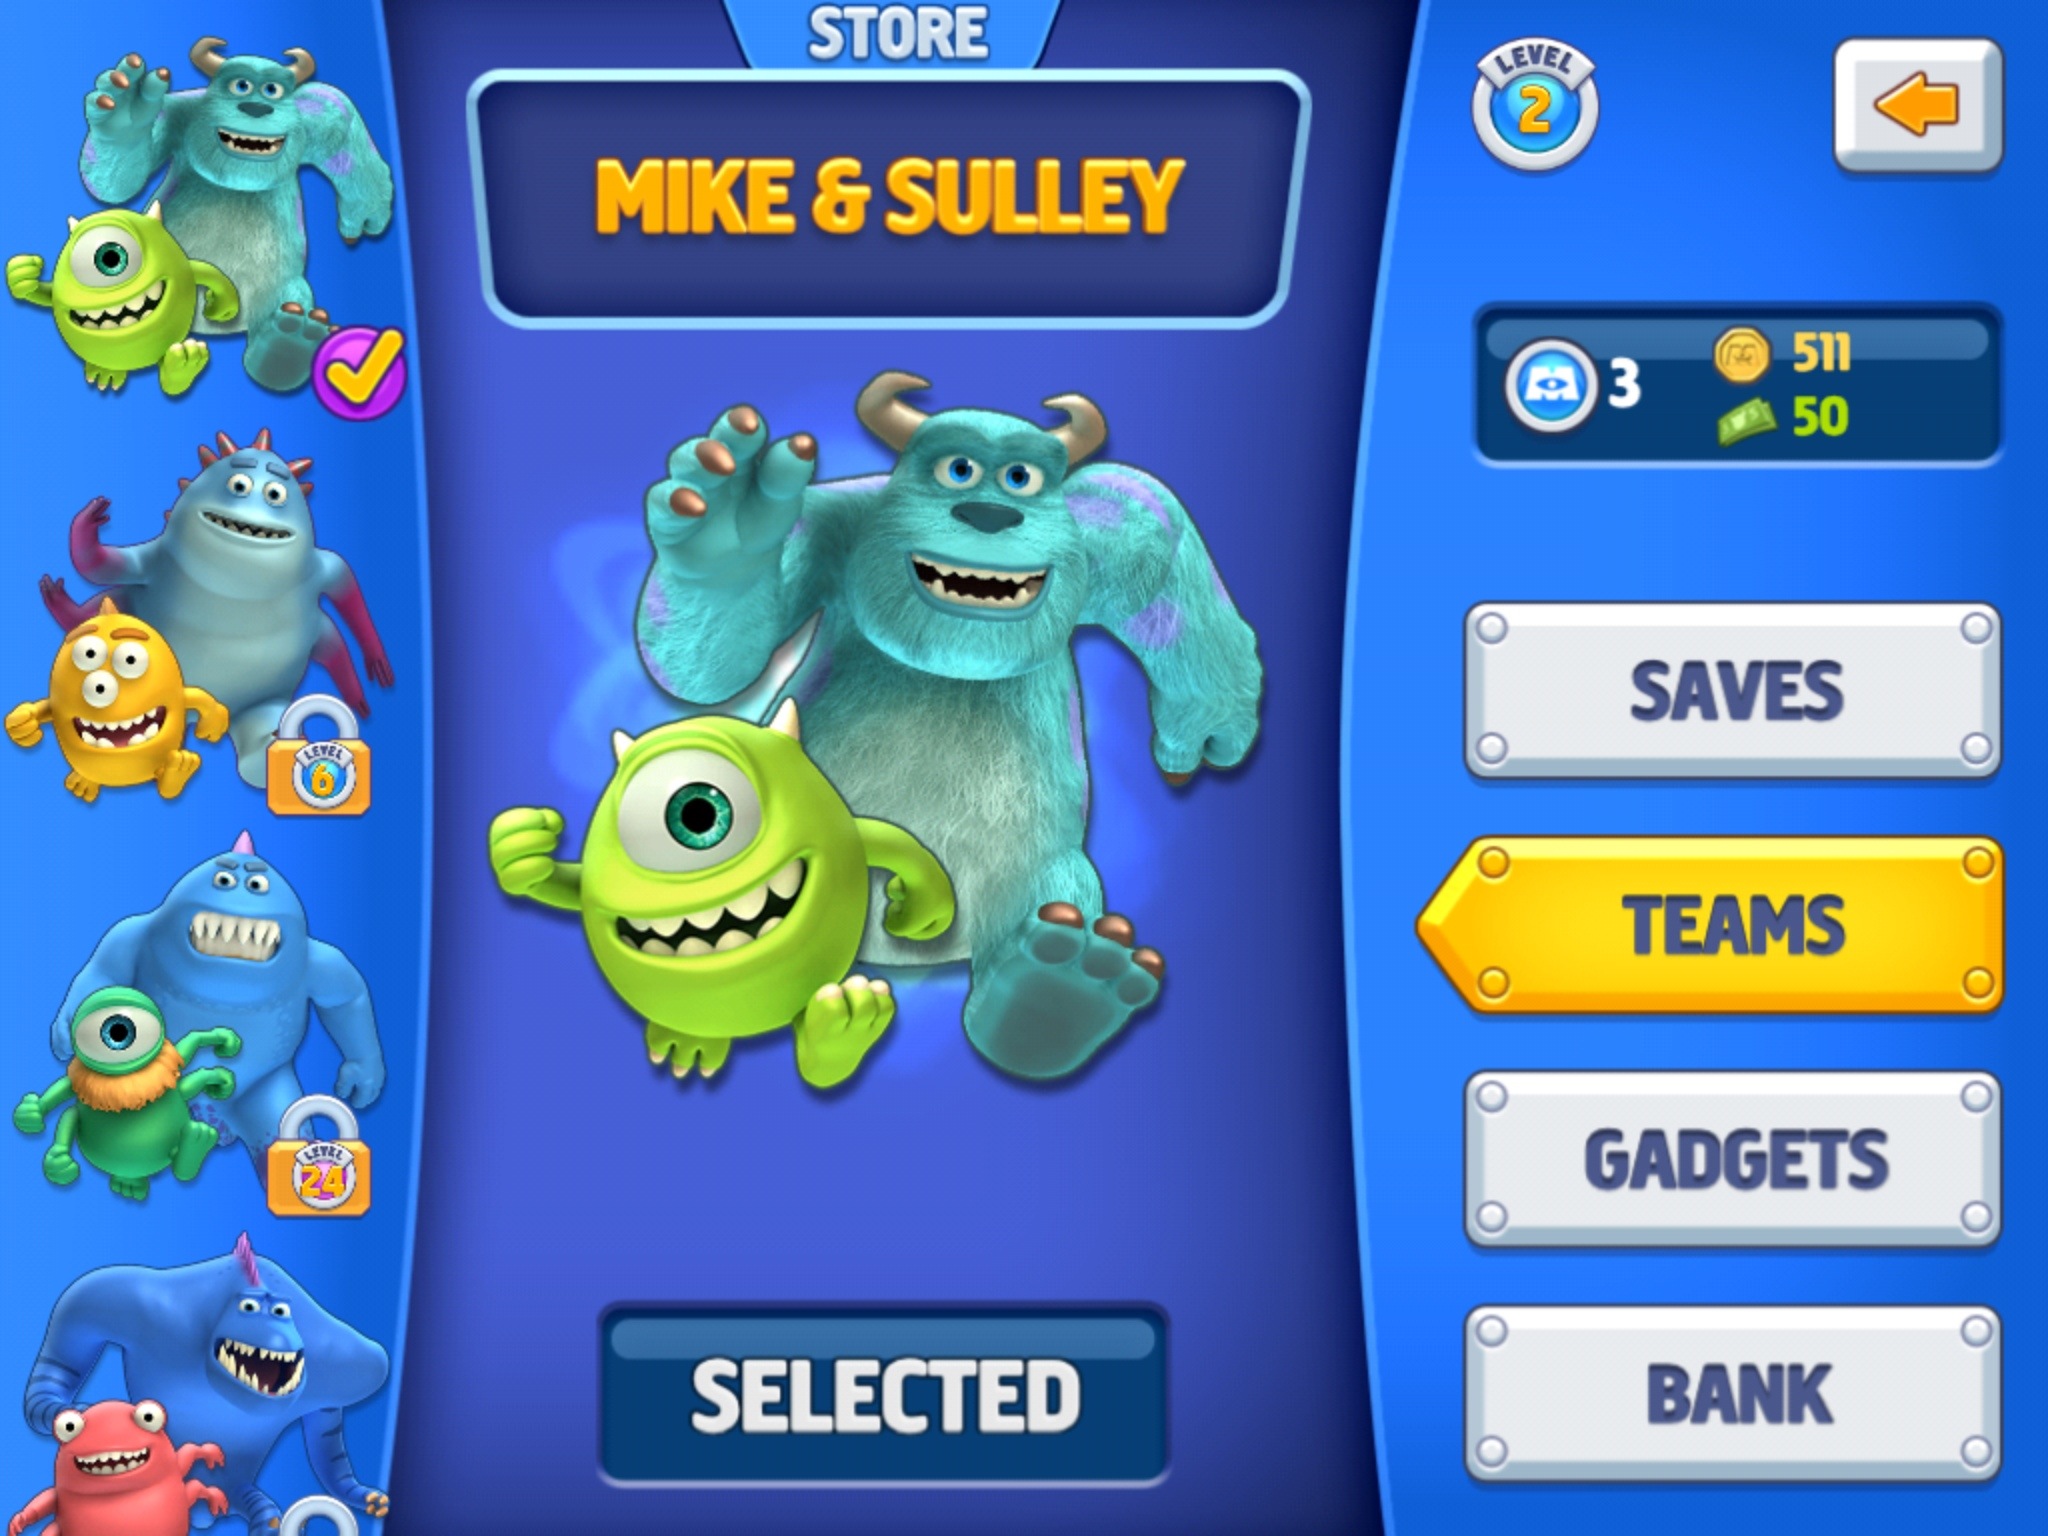 Monsters Inc. Run Mike and Sulley are just the beginning